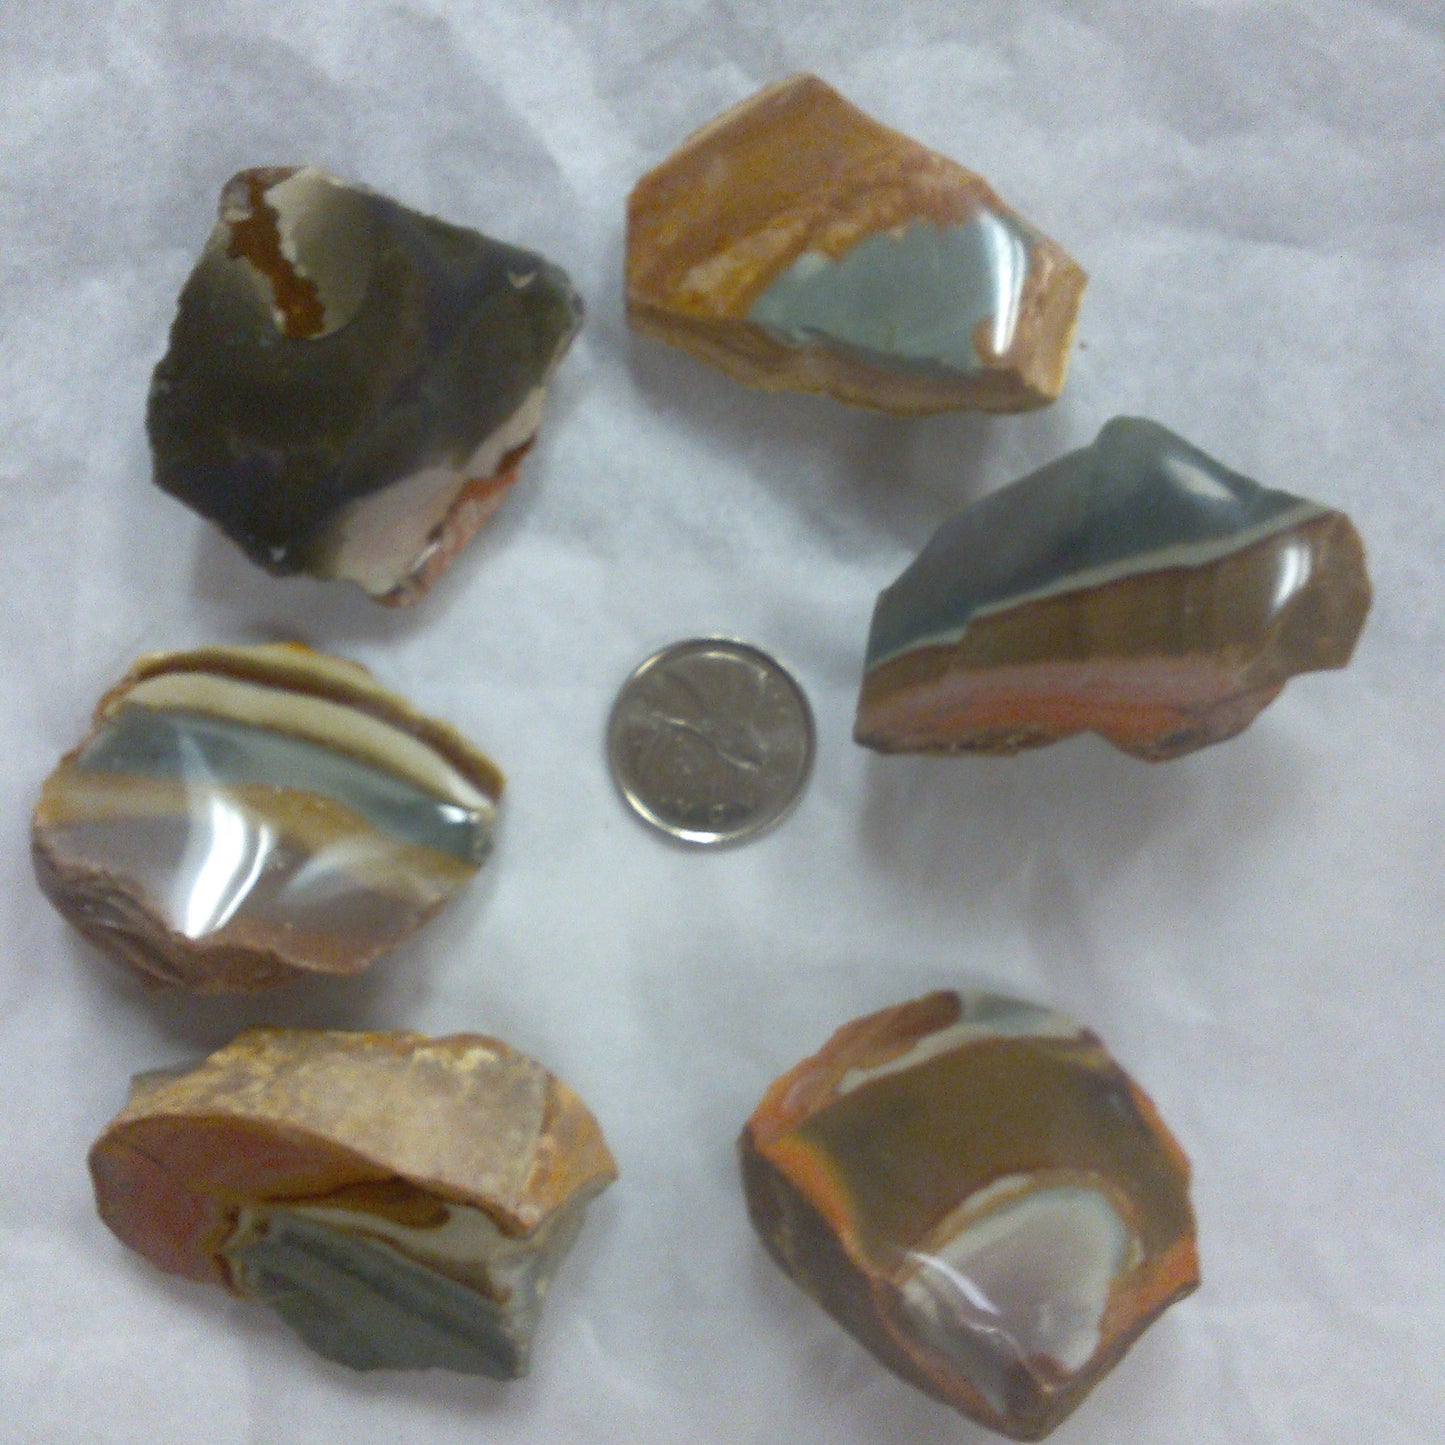 Polychrome Jasper Rough with Polished Face (30-60g)